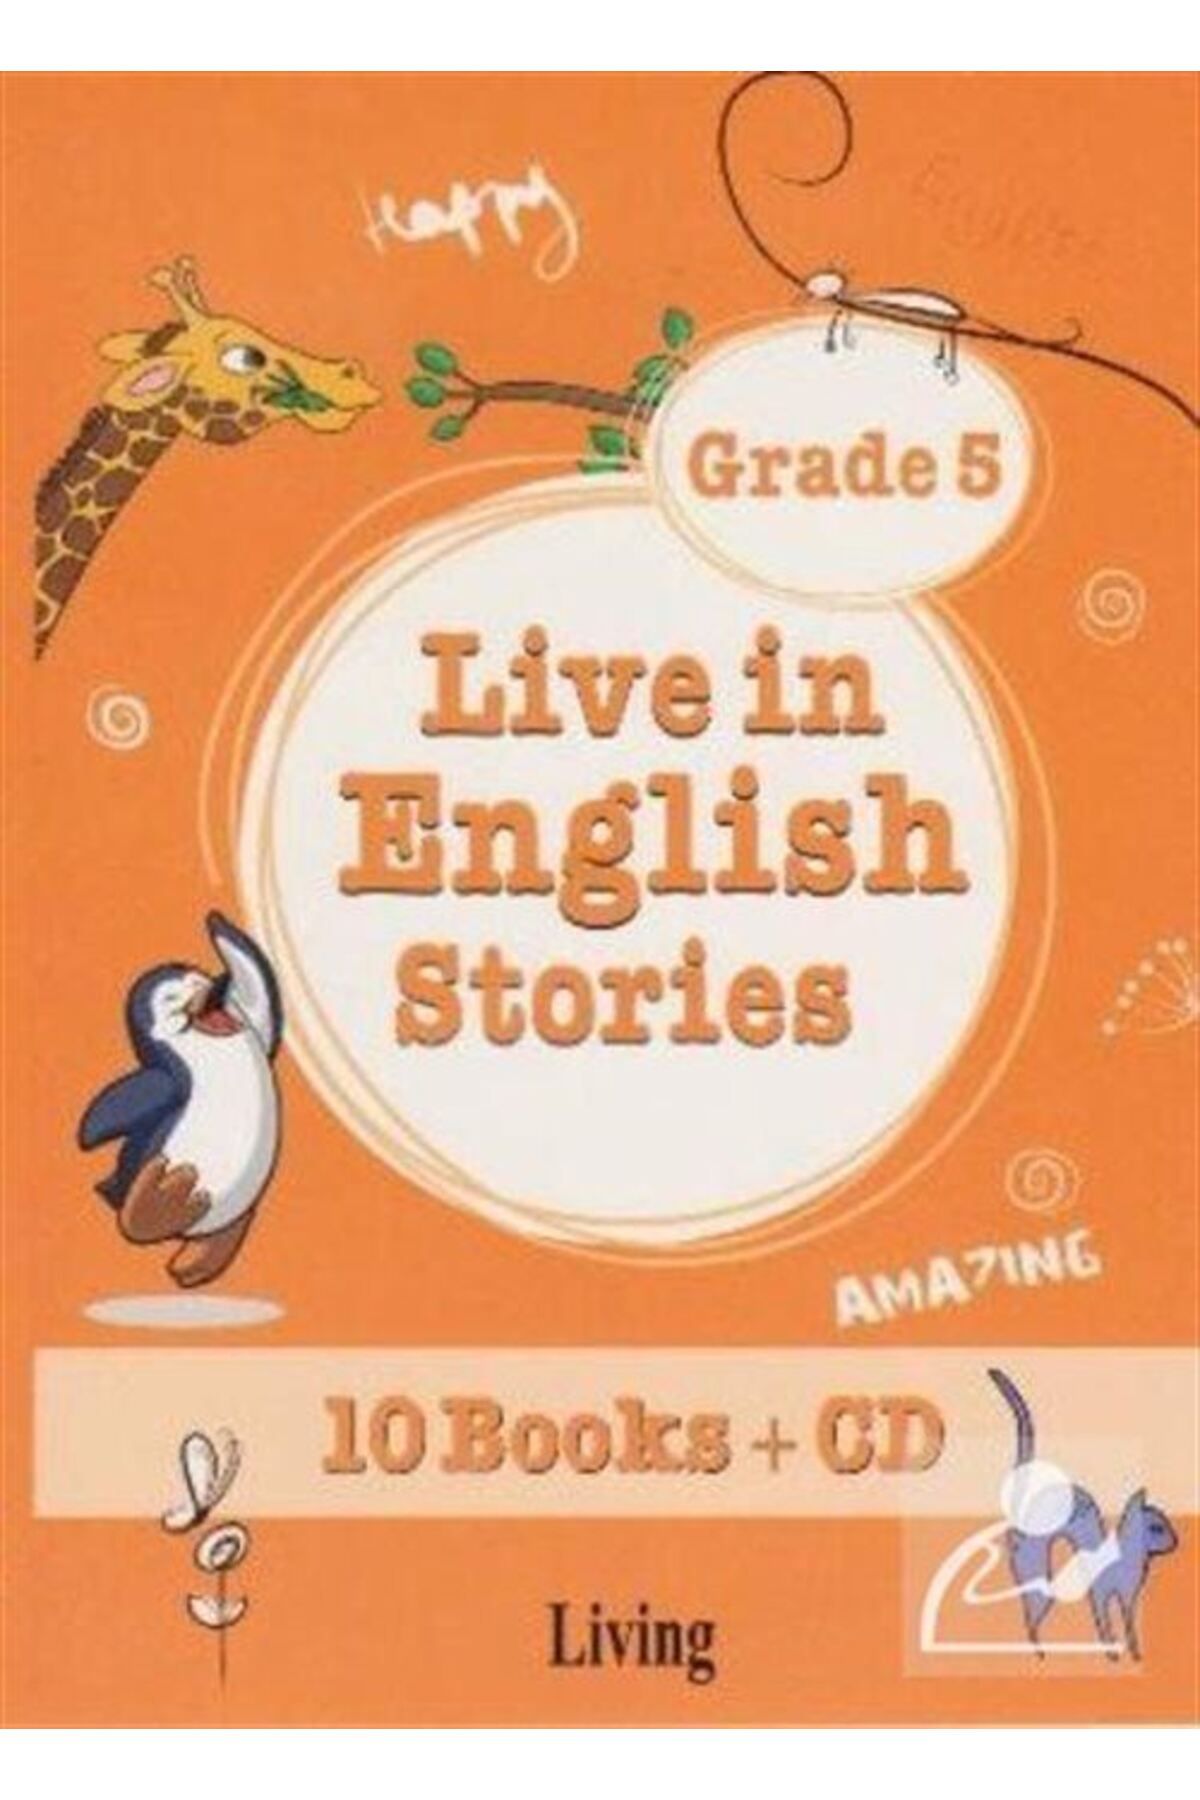 Living English Dictionary Live In English Stories Grade 5 (10 BOOKS-CD)